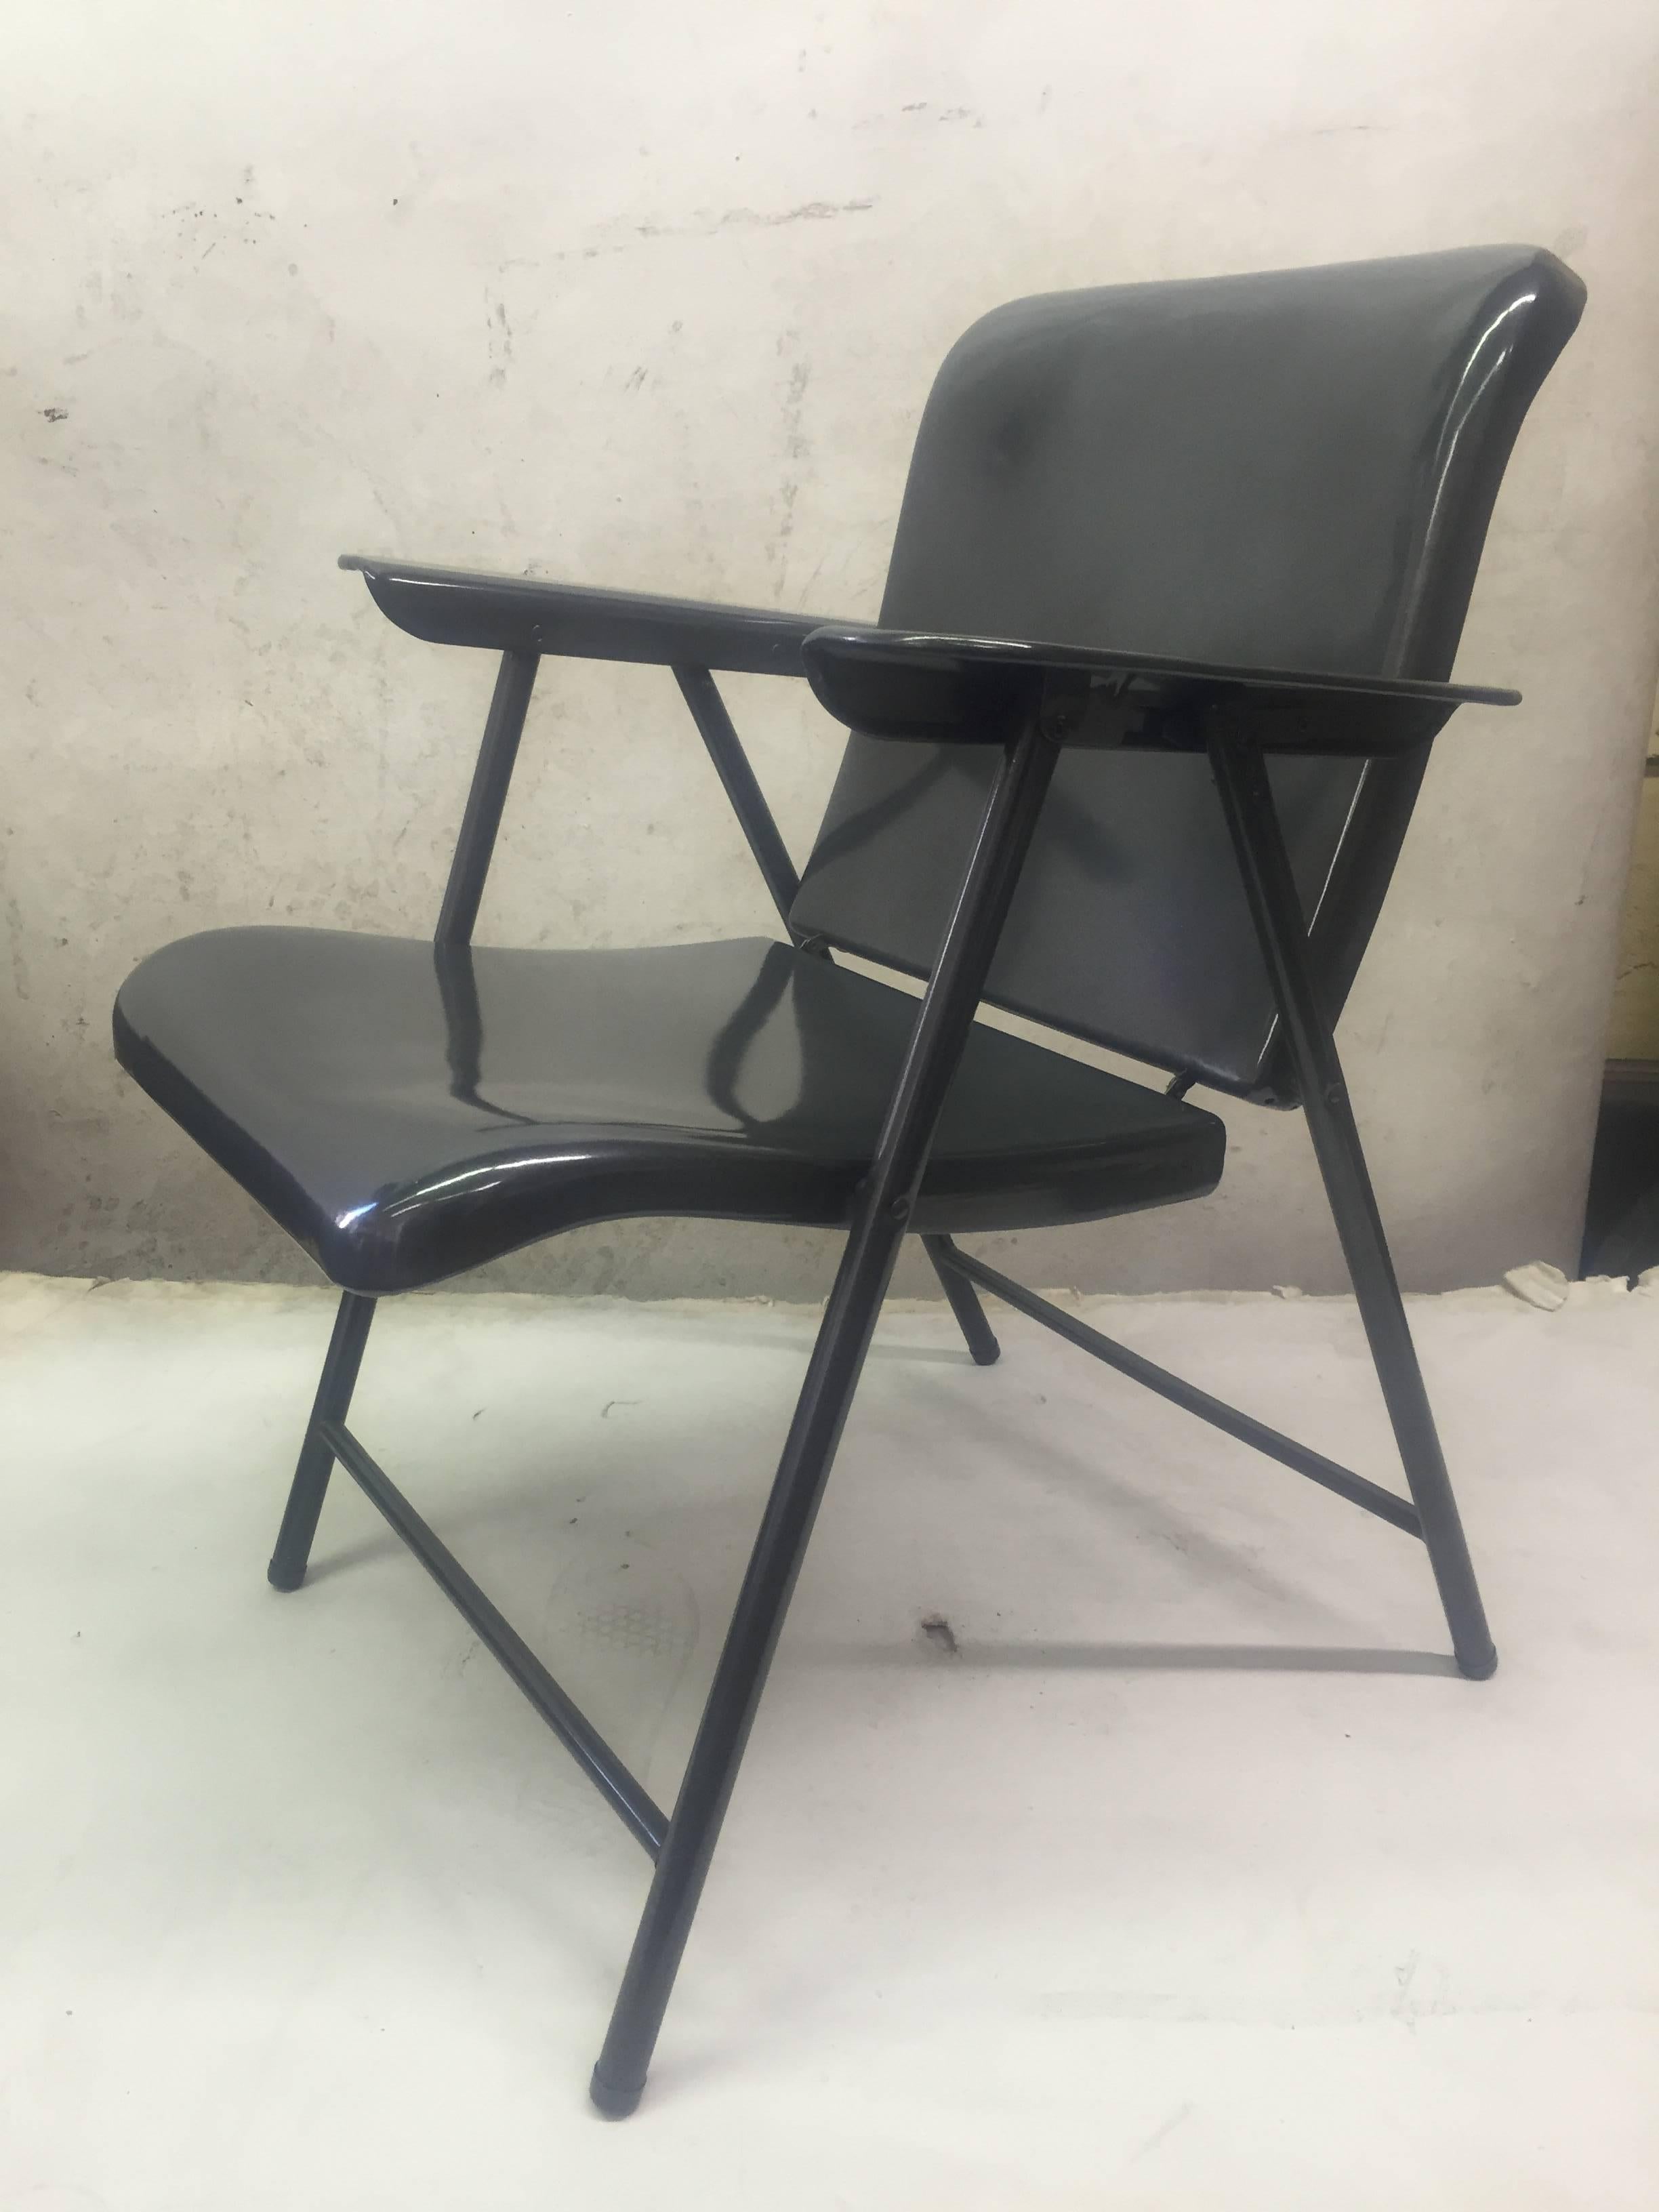 These chairs have been powder coated in a gun finish.
They fold, are very comfortable and light.
They can find their place in a garden or an office anywhere because they are very stylish.